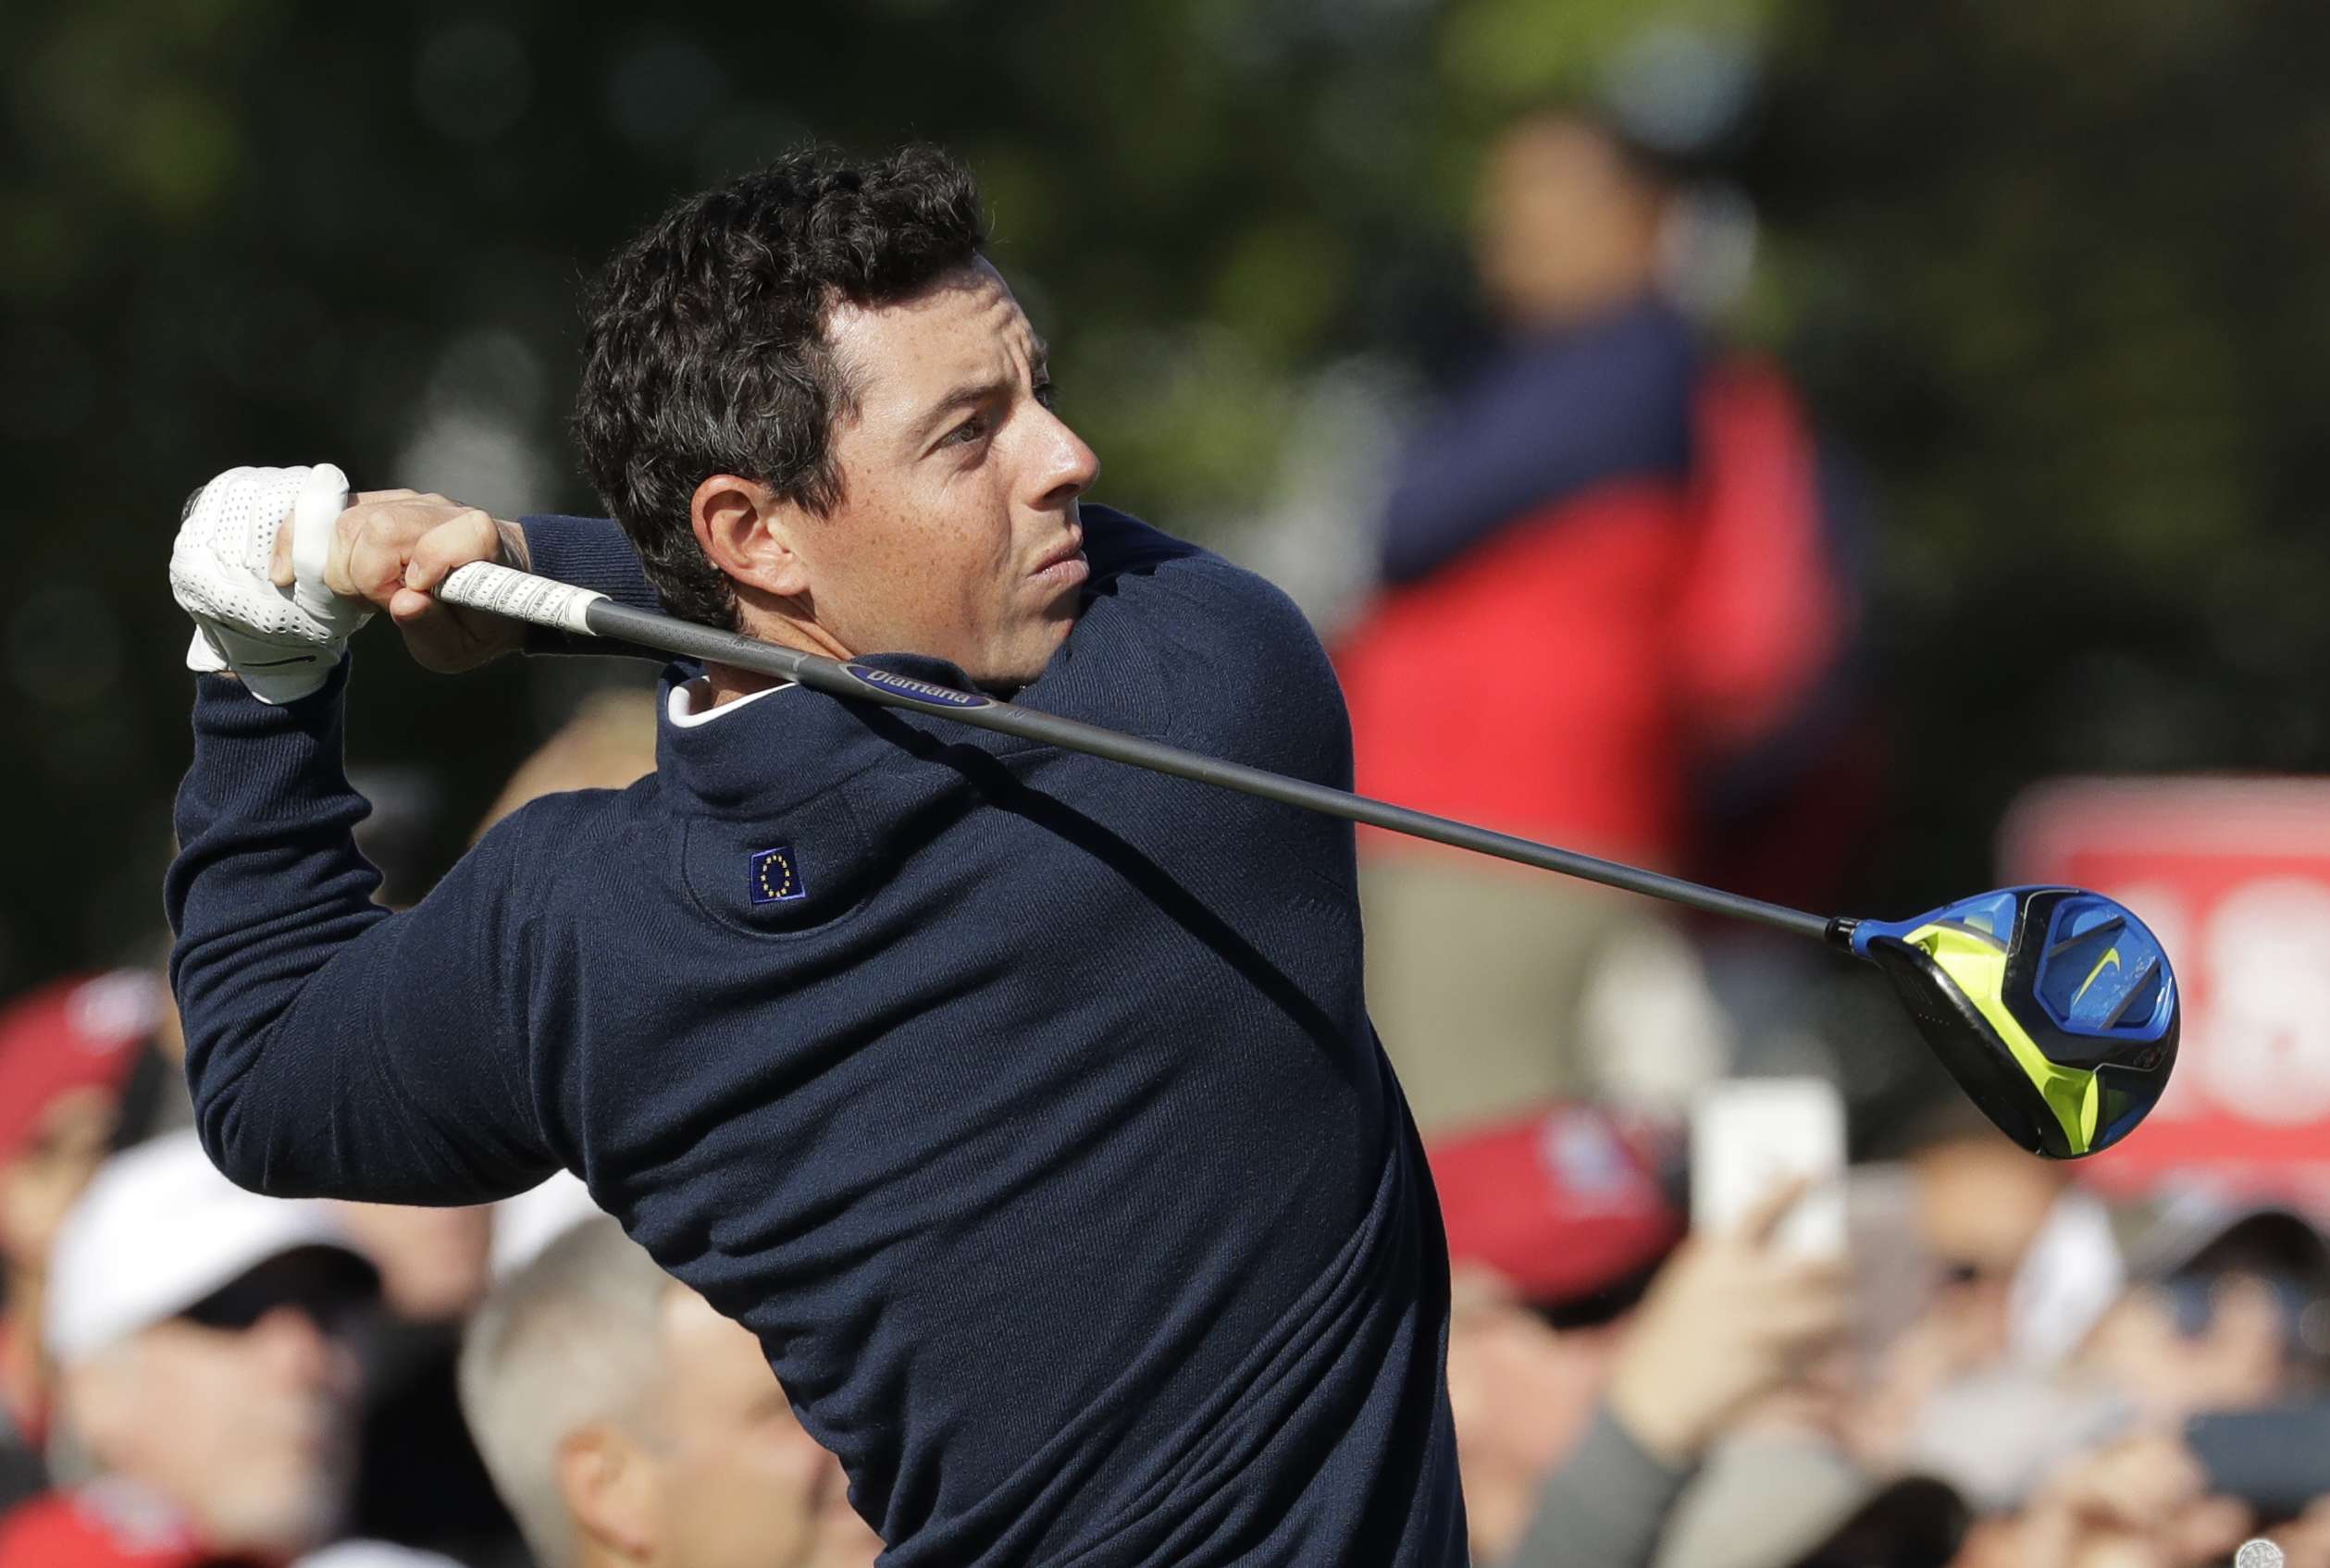 Europe's Rory McIlroy hits a drive on the second hole during a practice round for the Ryder Cup golf tournament Tuesday, Sept. 27, 2016, at Hazeltine National Golf Club in Chaska, Minn. (AP Photo/Charlie Riedel)